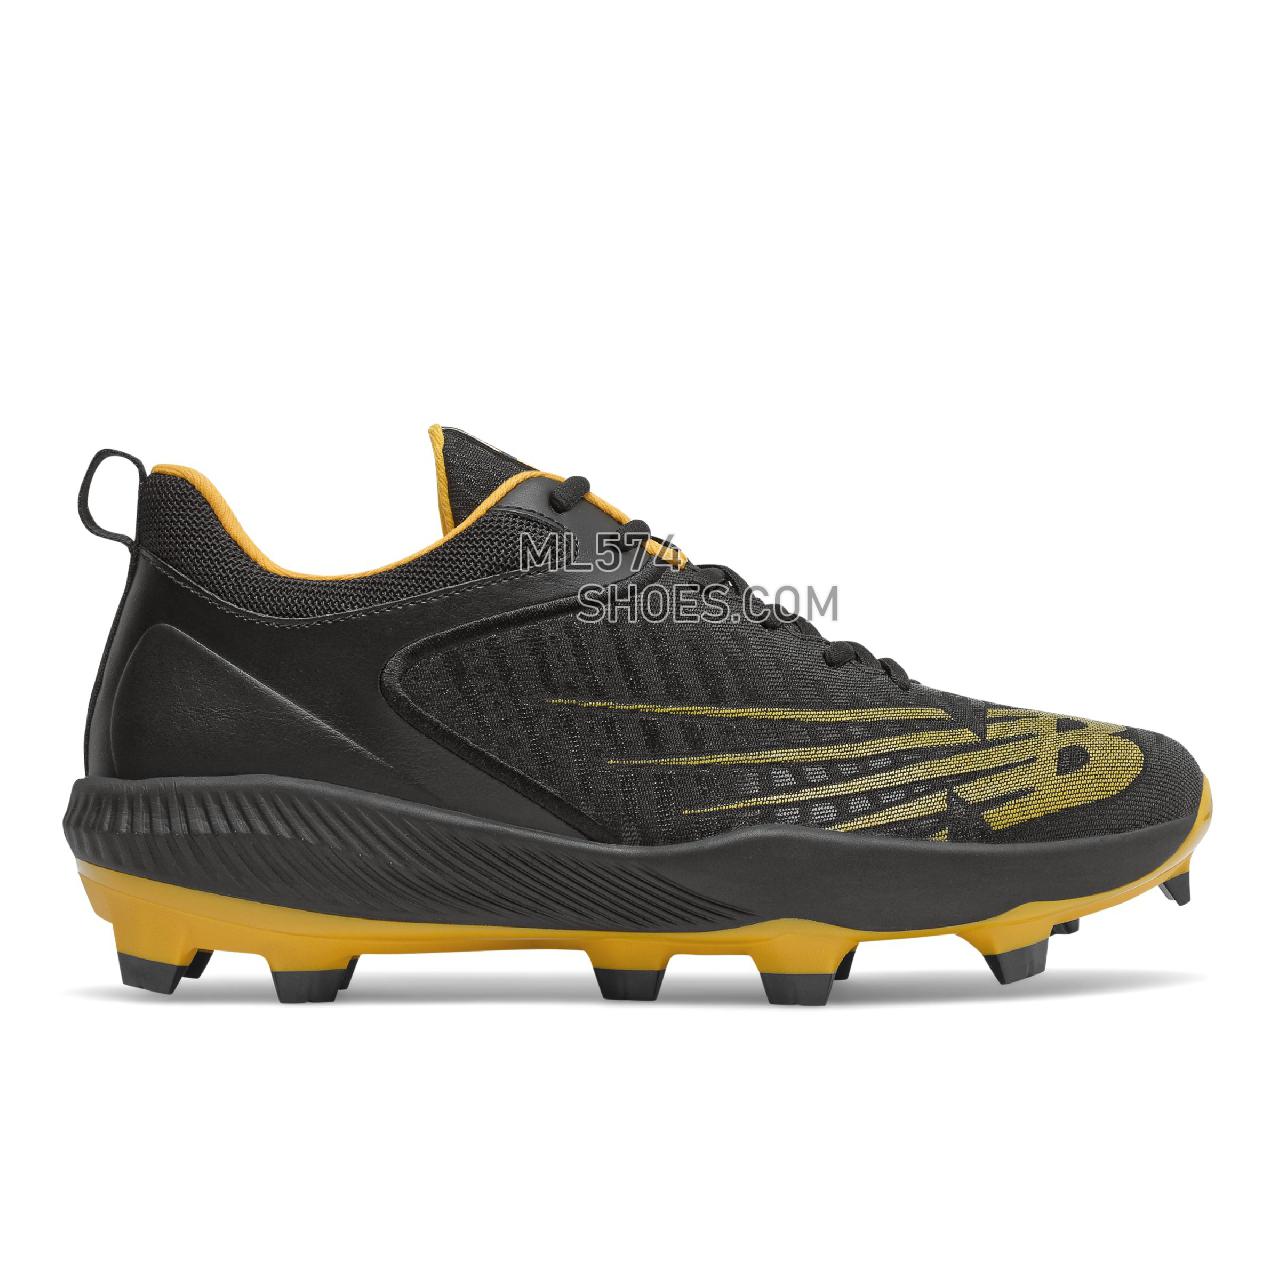 New Balance FuelCell 4040 v6 Molded - Men's Mid-Cut Baseball Cleats - Black with Yellow - PL4040Y6